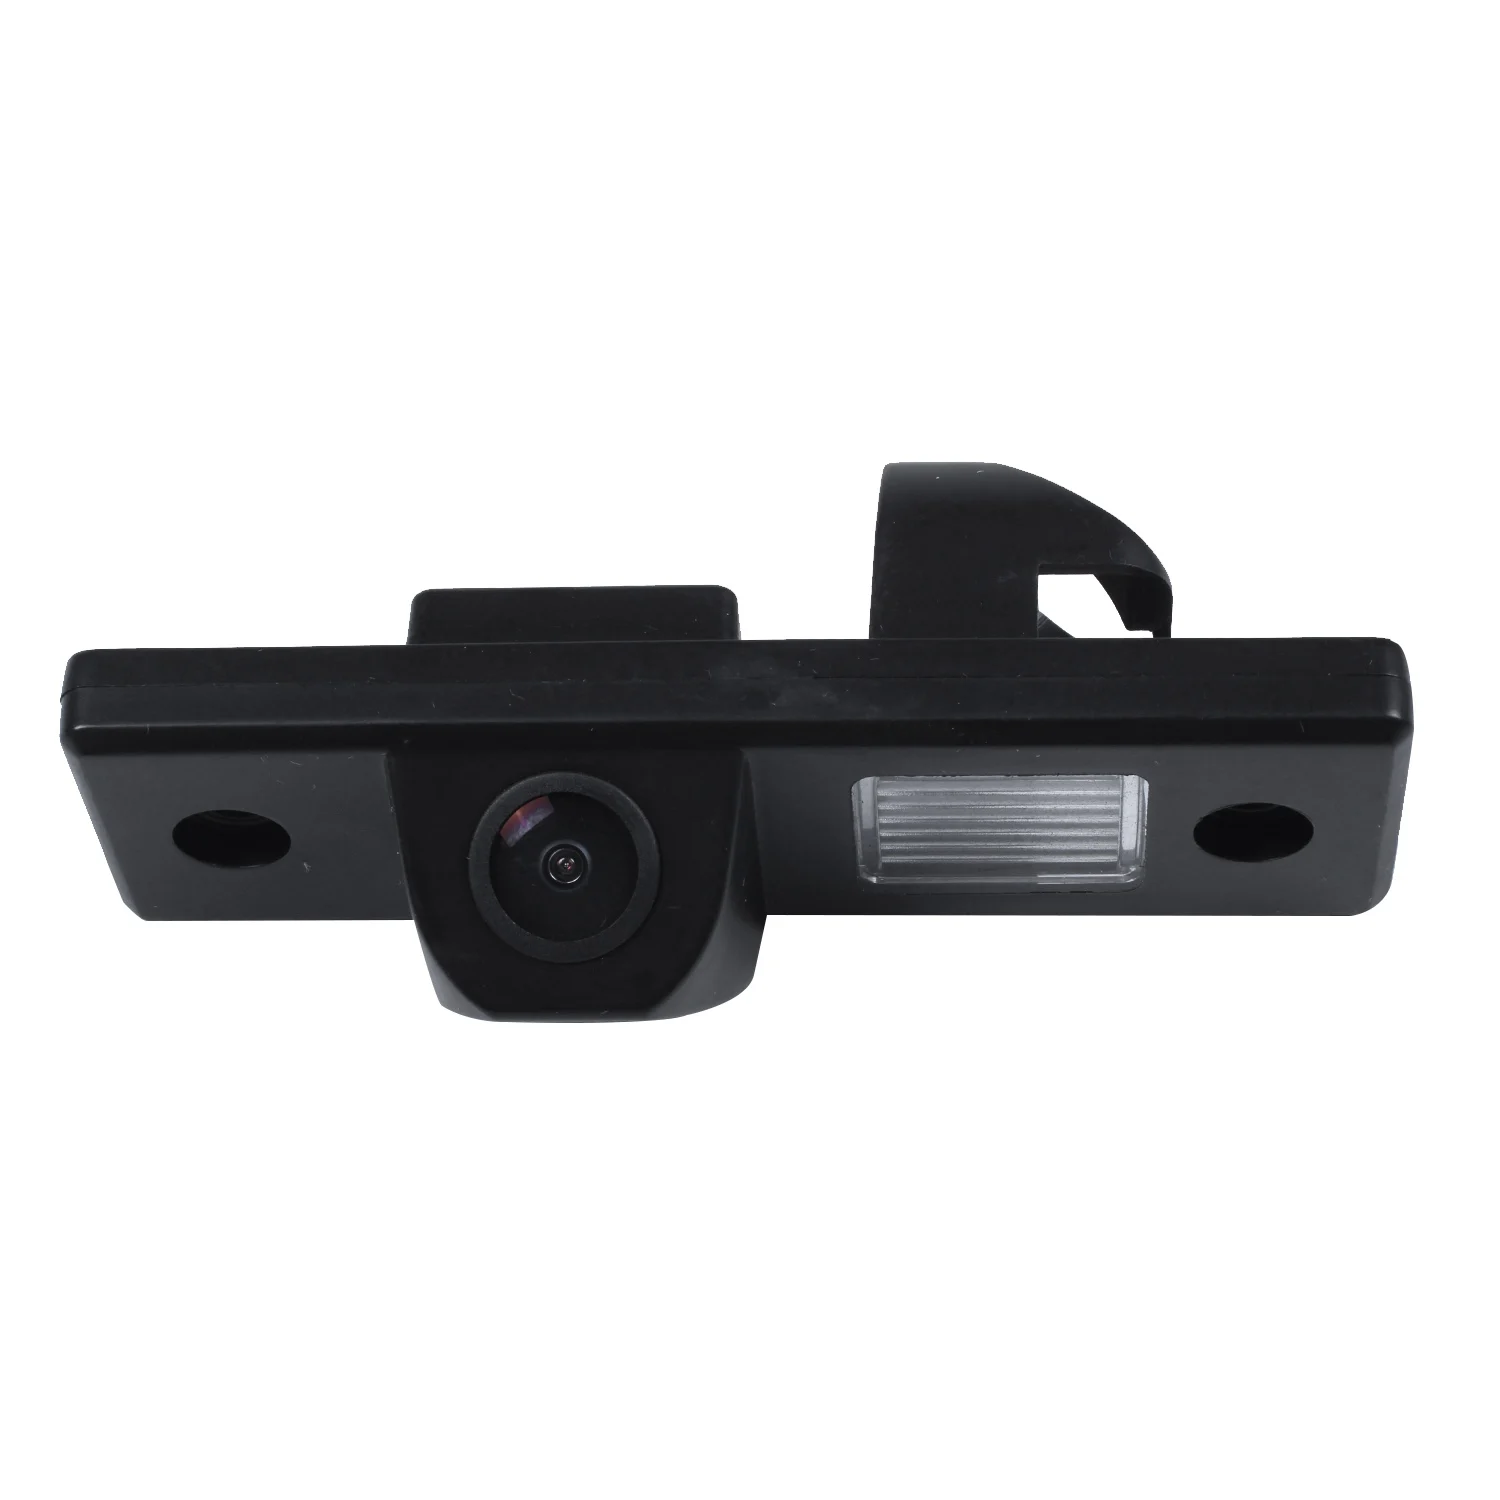 

Special Car Rear View Reverse Backup CCD Camera Rearview Parking For Chevrolet Epica/Lova/Aveo/Captiva/Cruze/Lacetti